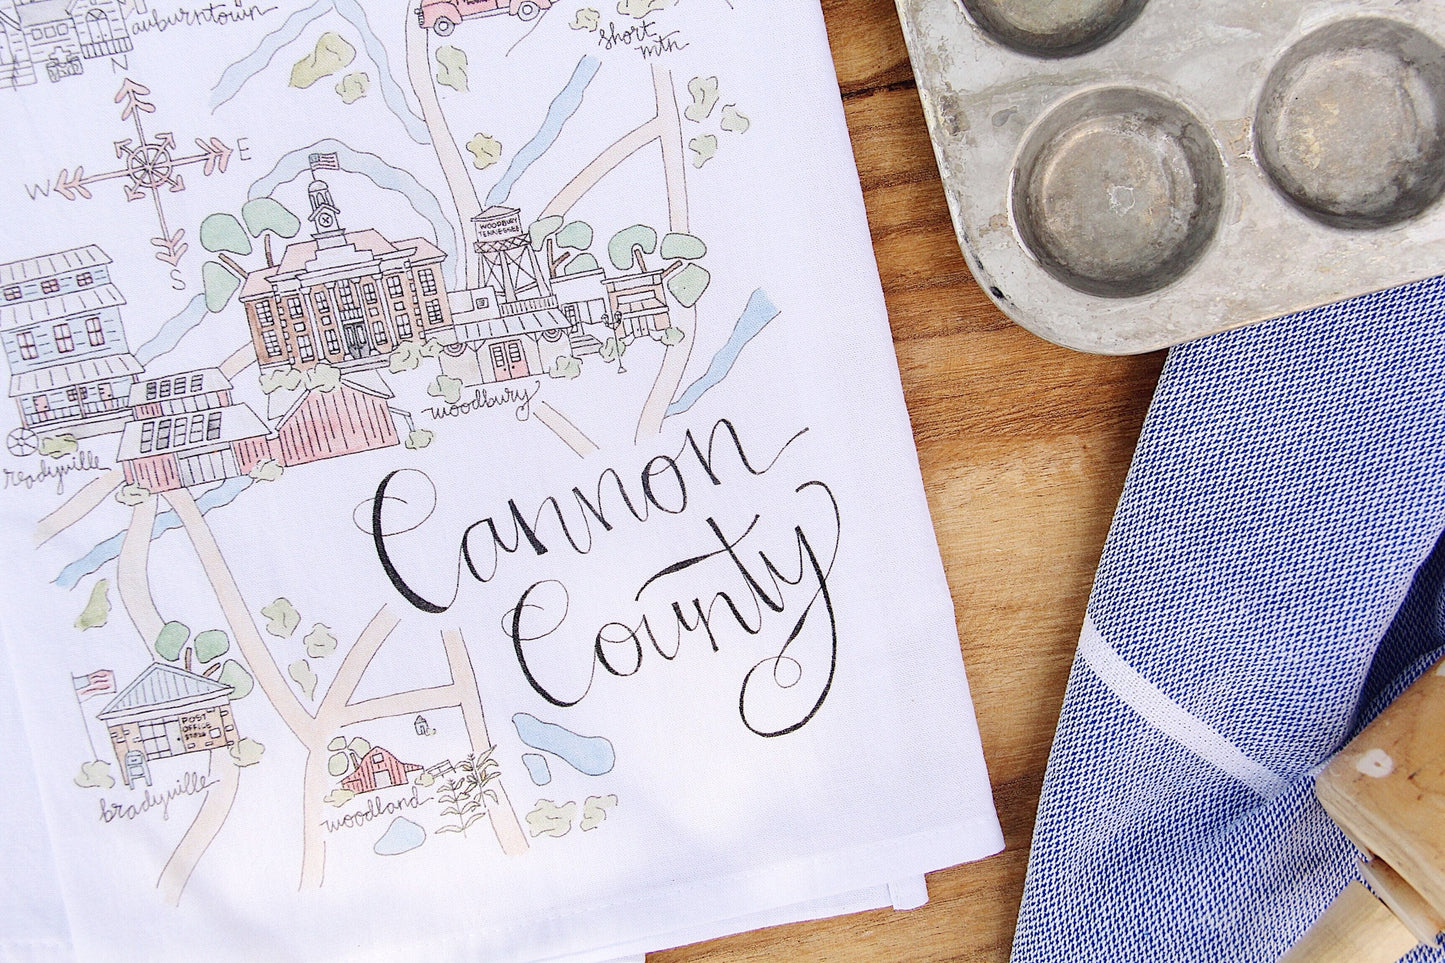 Cannon County, Tennessee Tea Towel